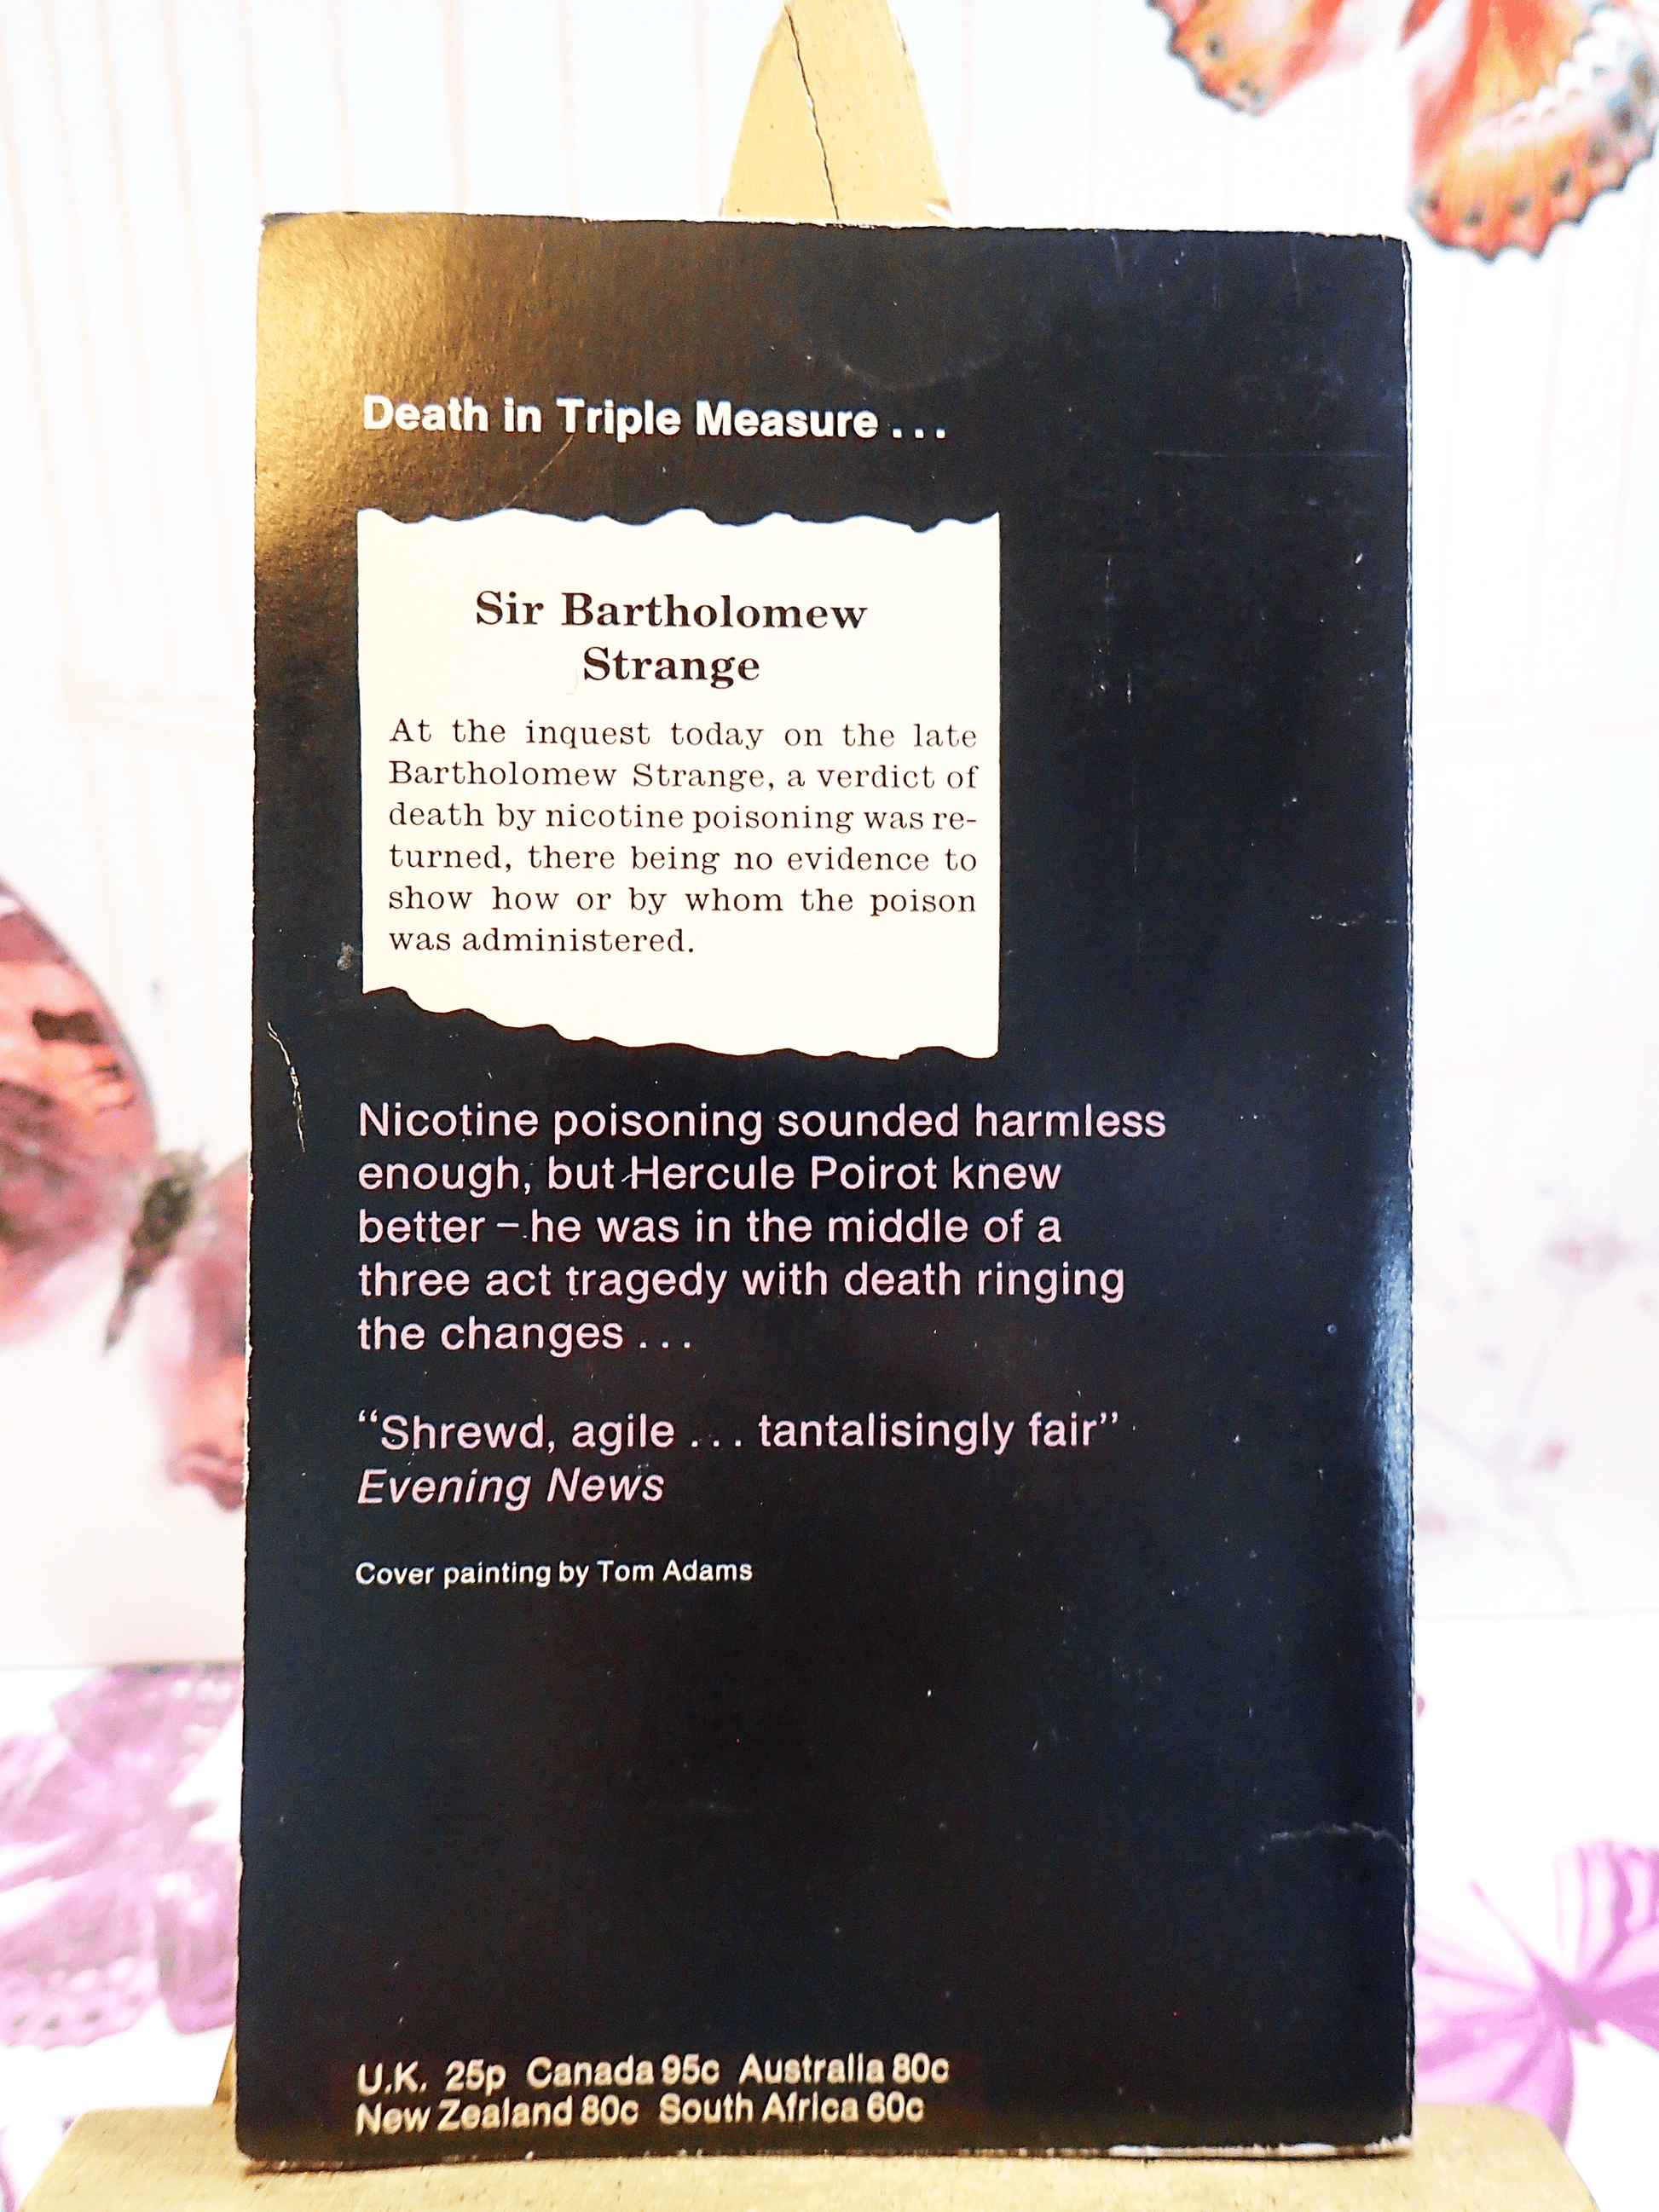 Back cover of Three Act Tragedy by Agatha Christie Vintage Pan Paperback Classic Crime book showing text blurb: "Death in triple measure..."